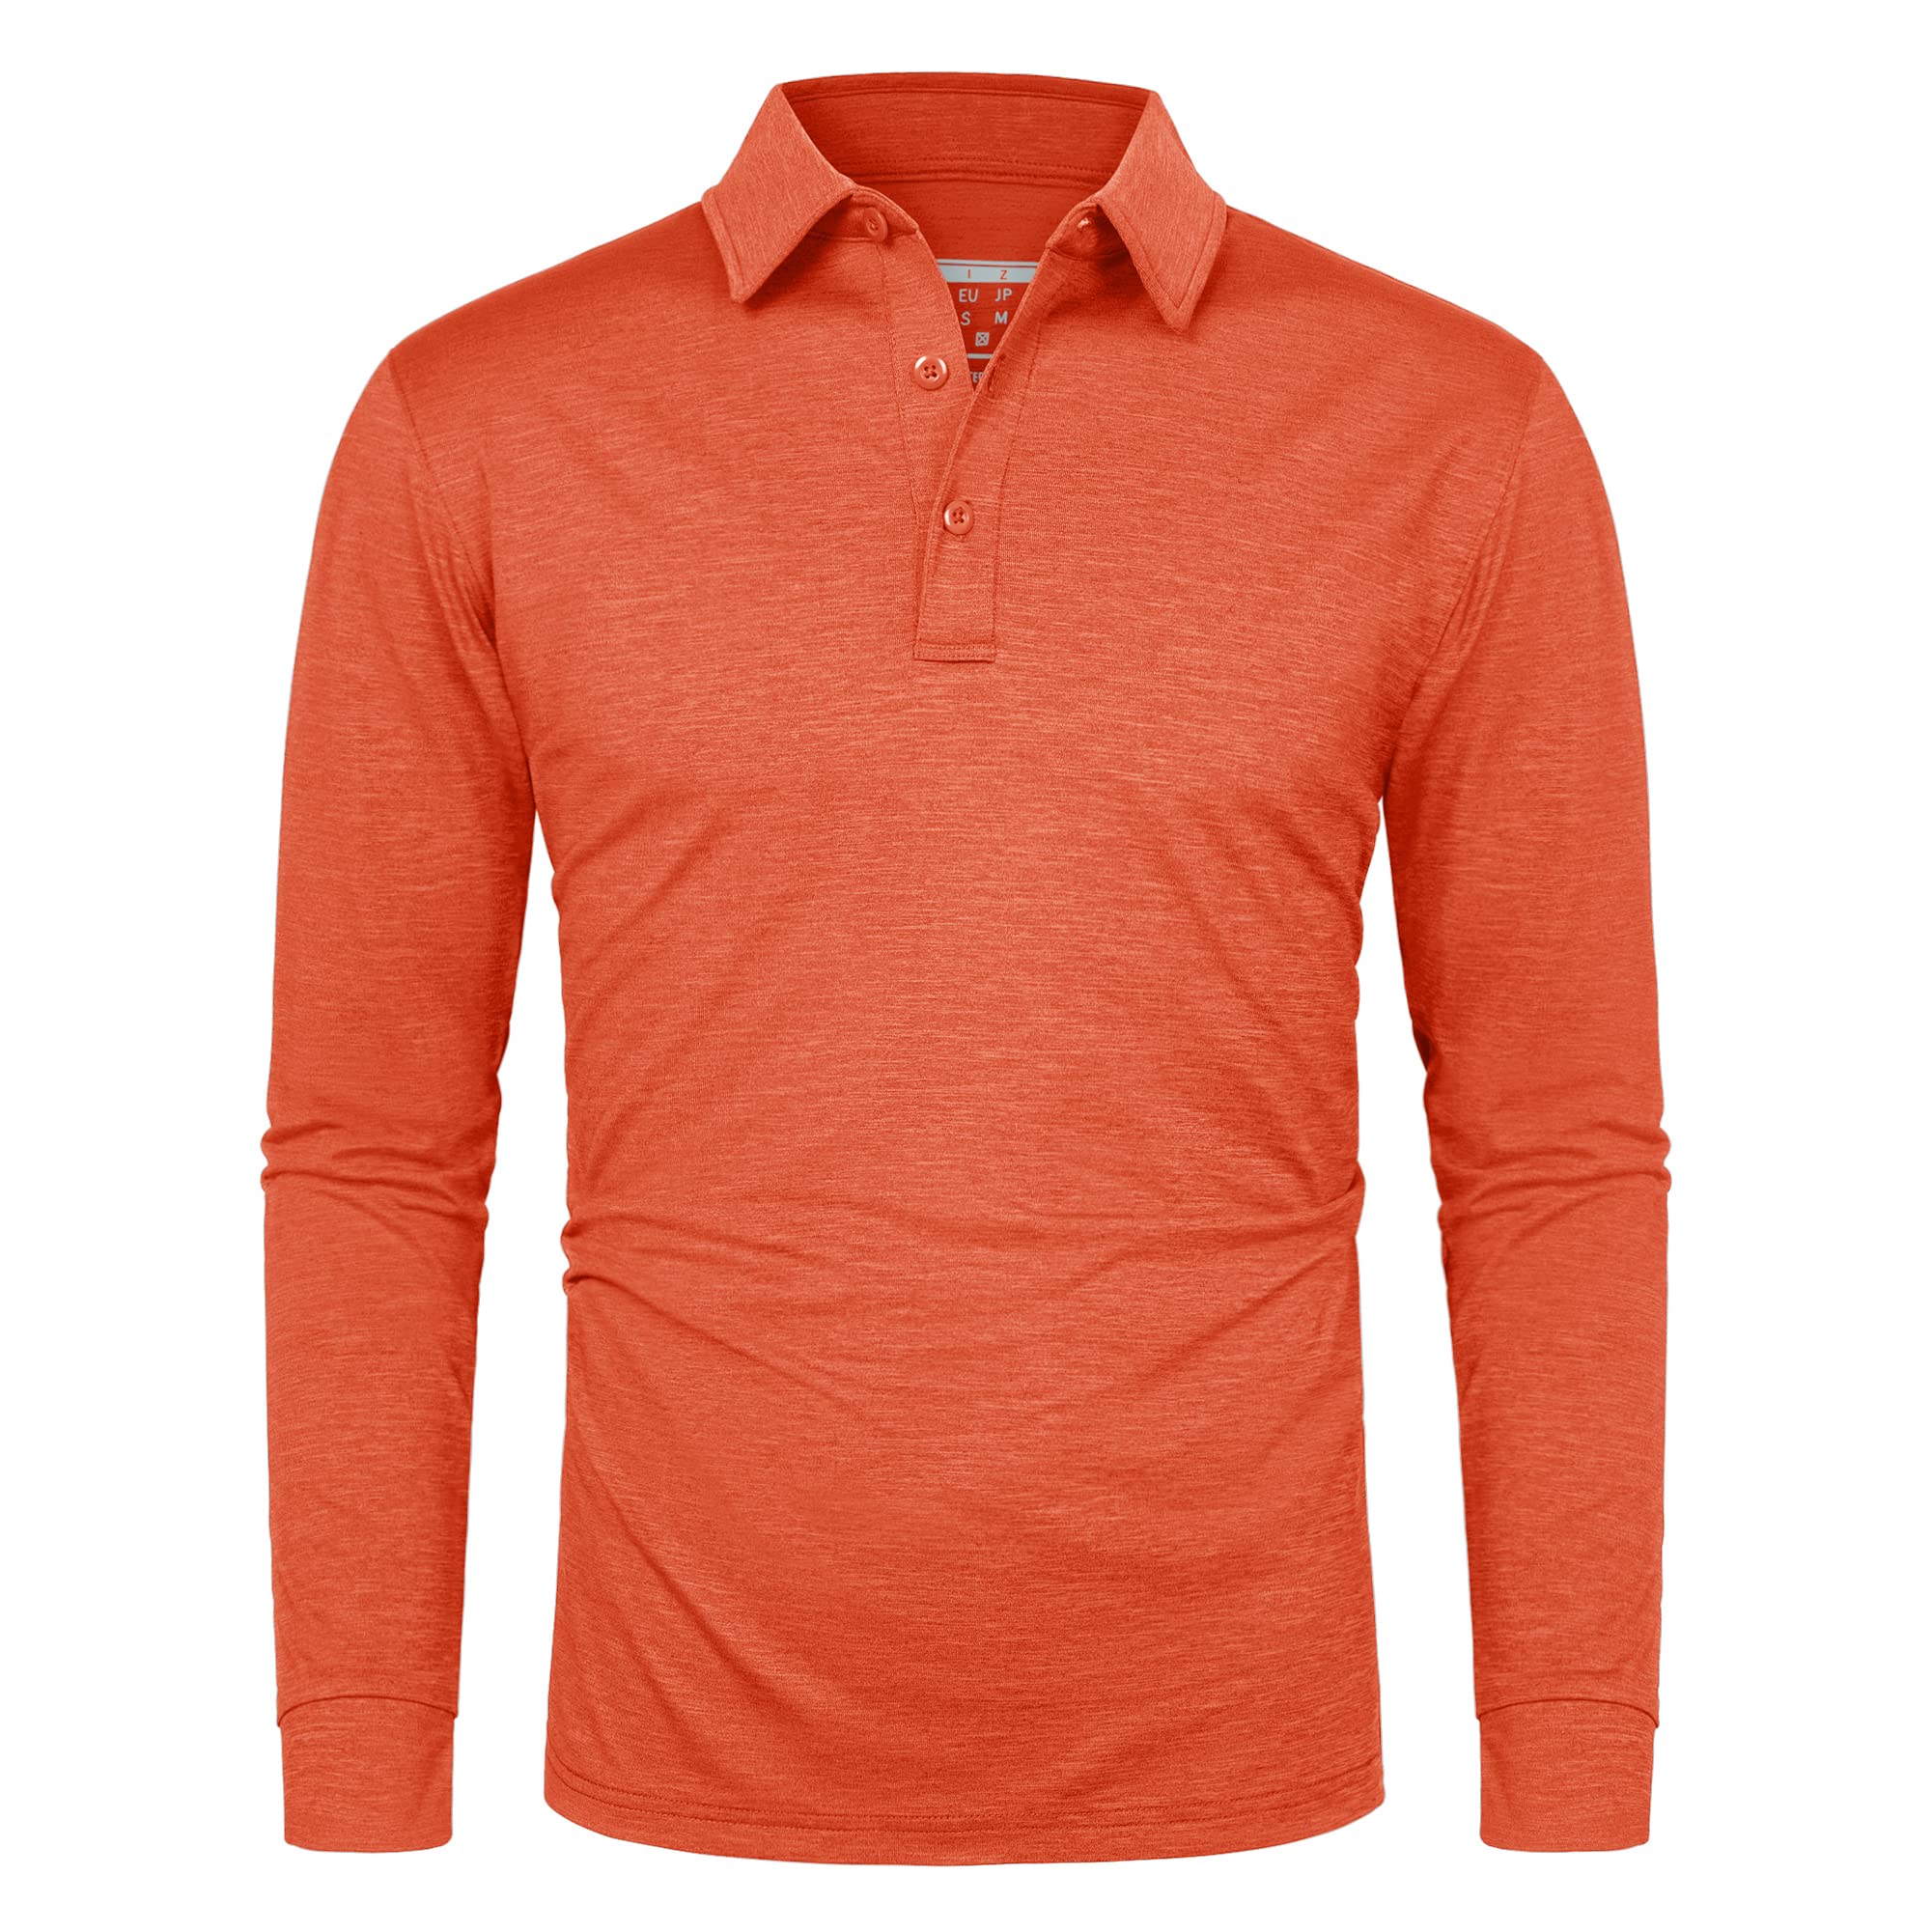 Soft Polyester Golf Polo Long Sleeve Shirt in orange